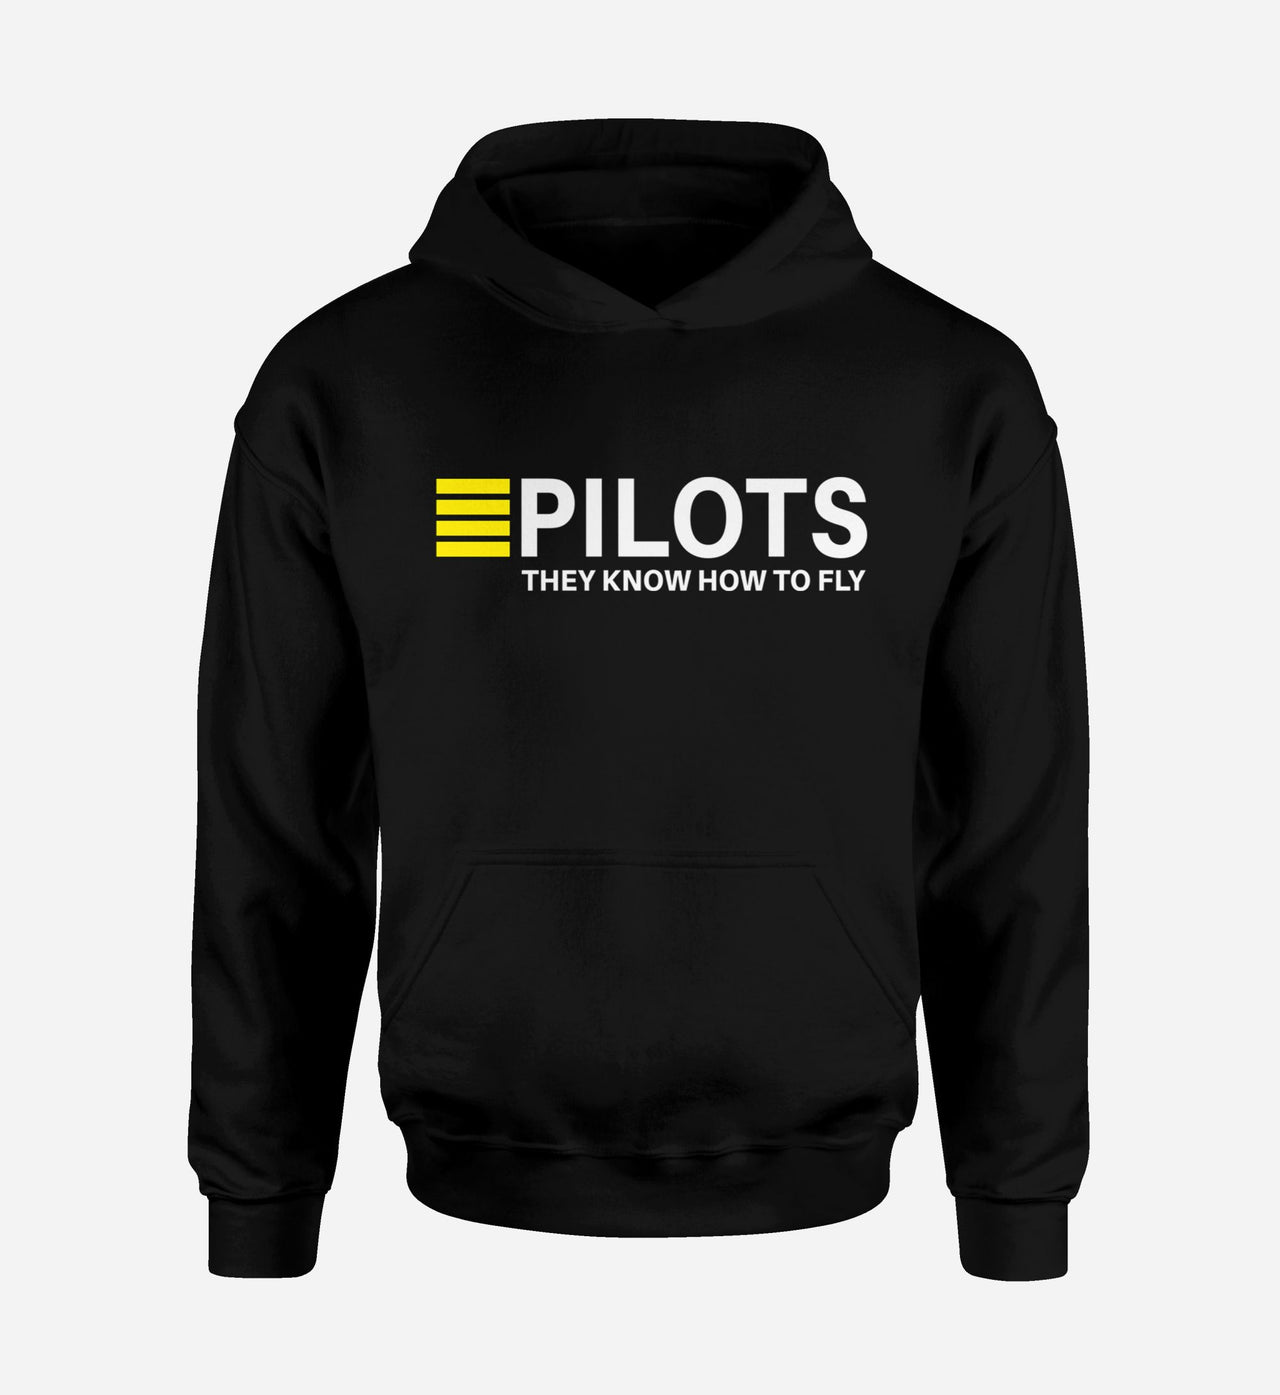 Pilots They Know How To Fly Designed Hoodies